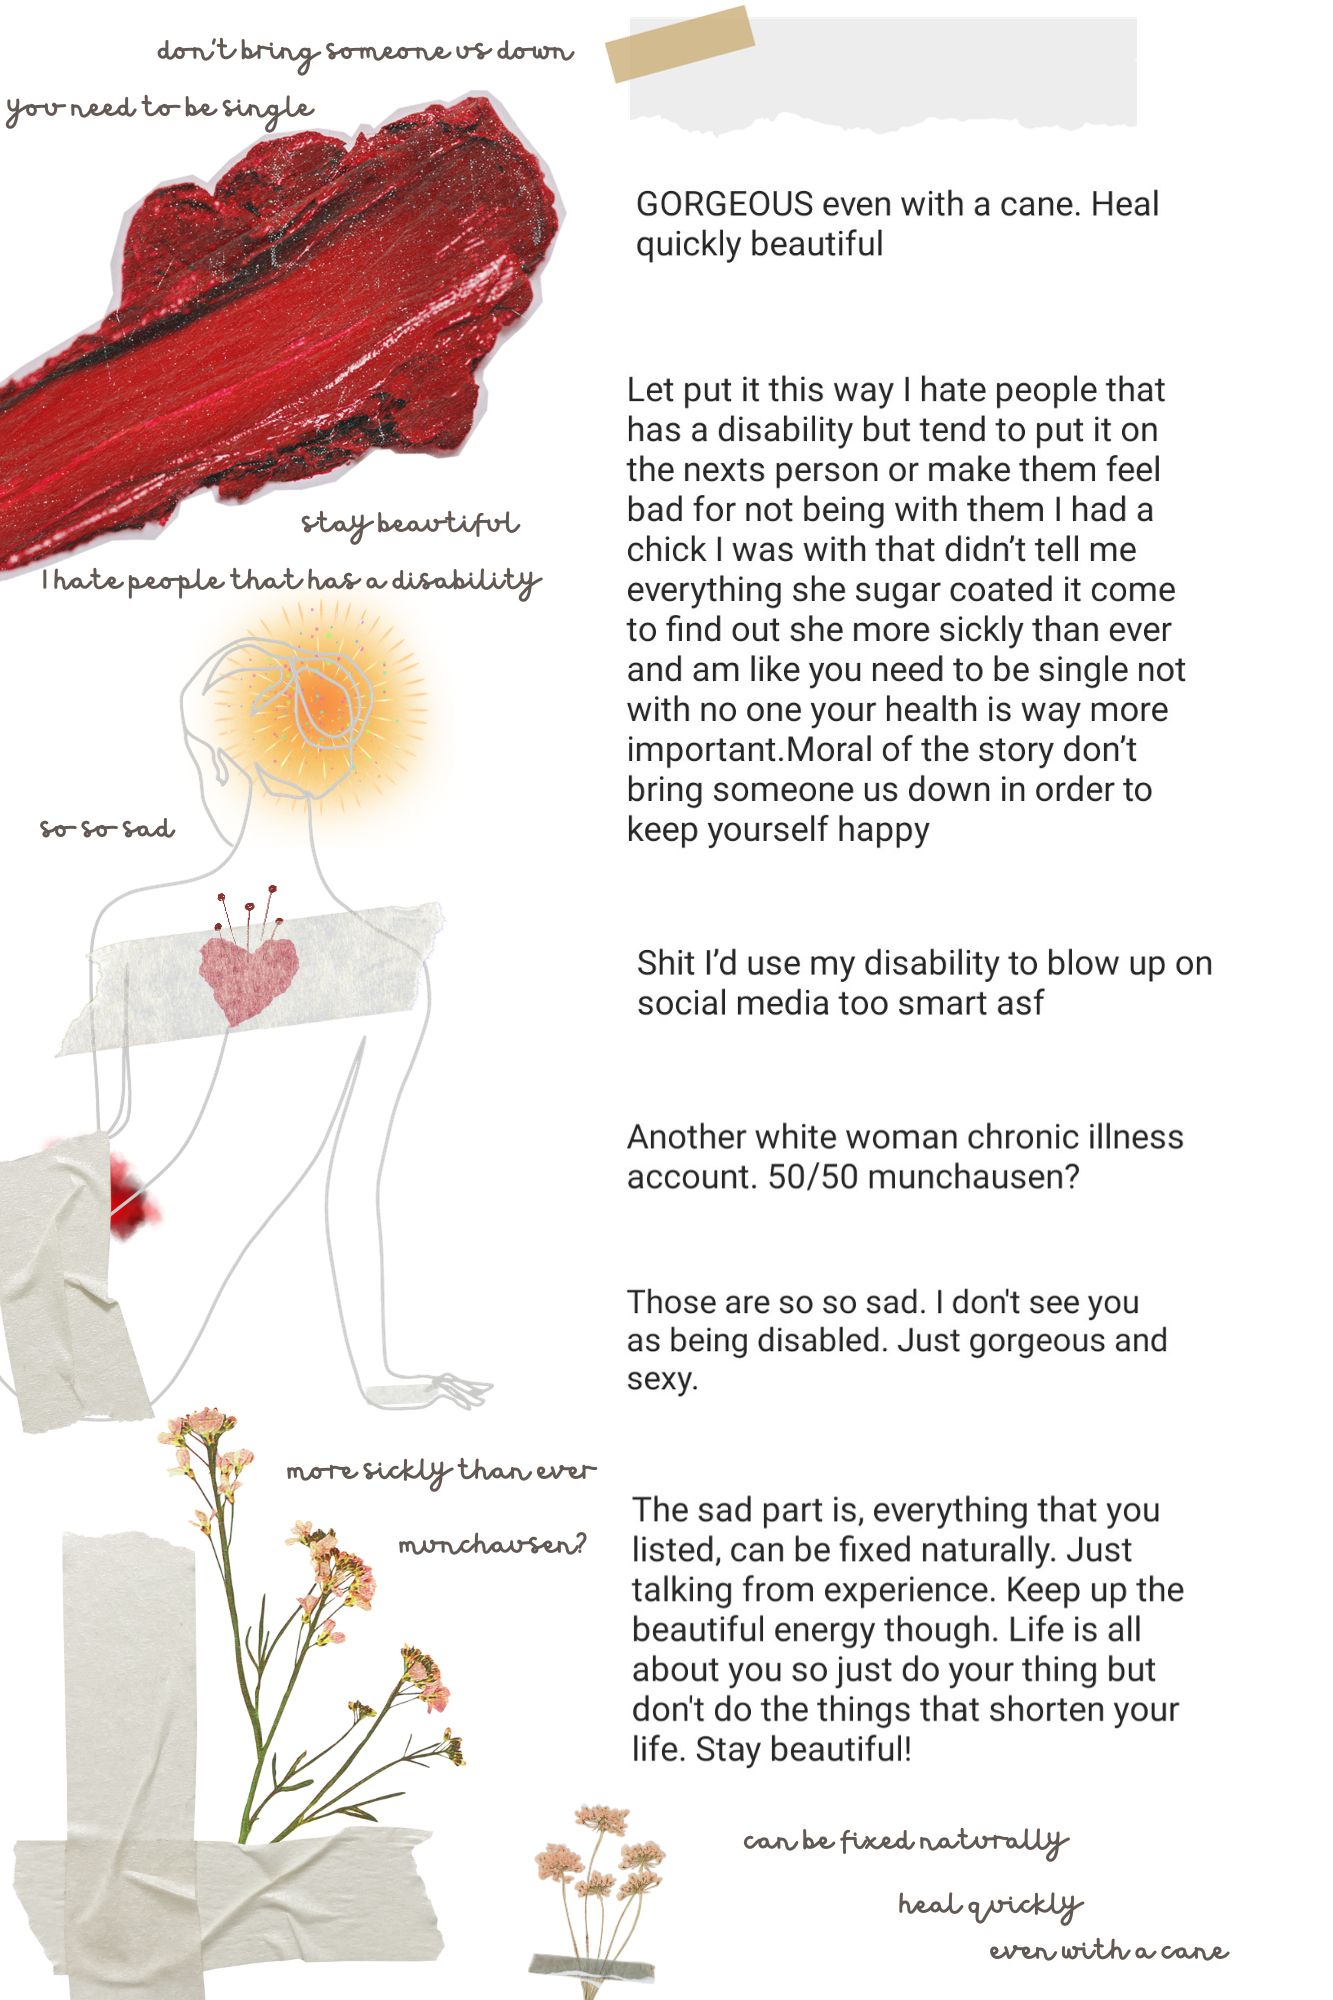 A hybrid poem with text and images including smeared lipstick, taped flowers, and the outline of a body. The hybrid text uses social media comments to comment on ableism and biphobia.